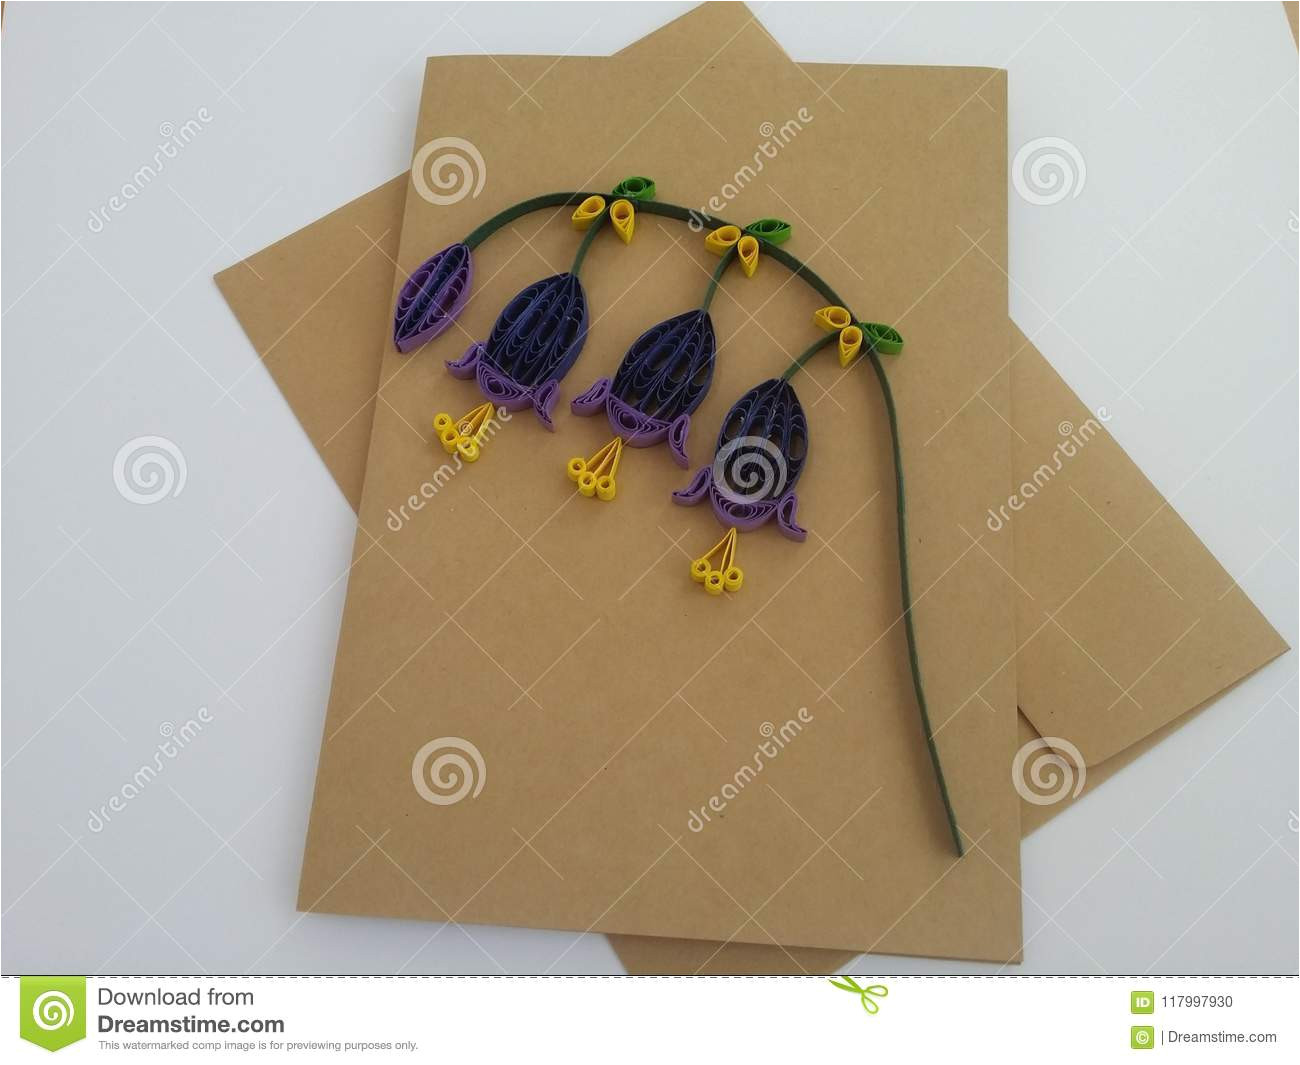 quilling greeting cards paper art all events birthday new year ramadan friendship day 117997930 jpg